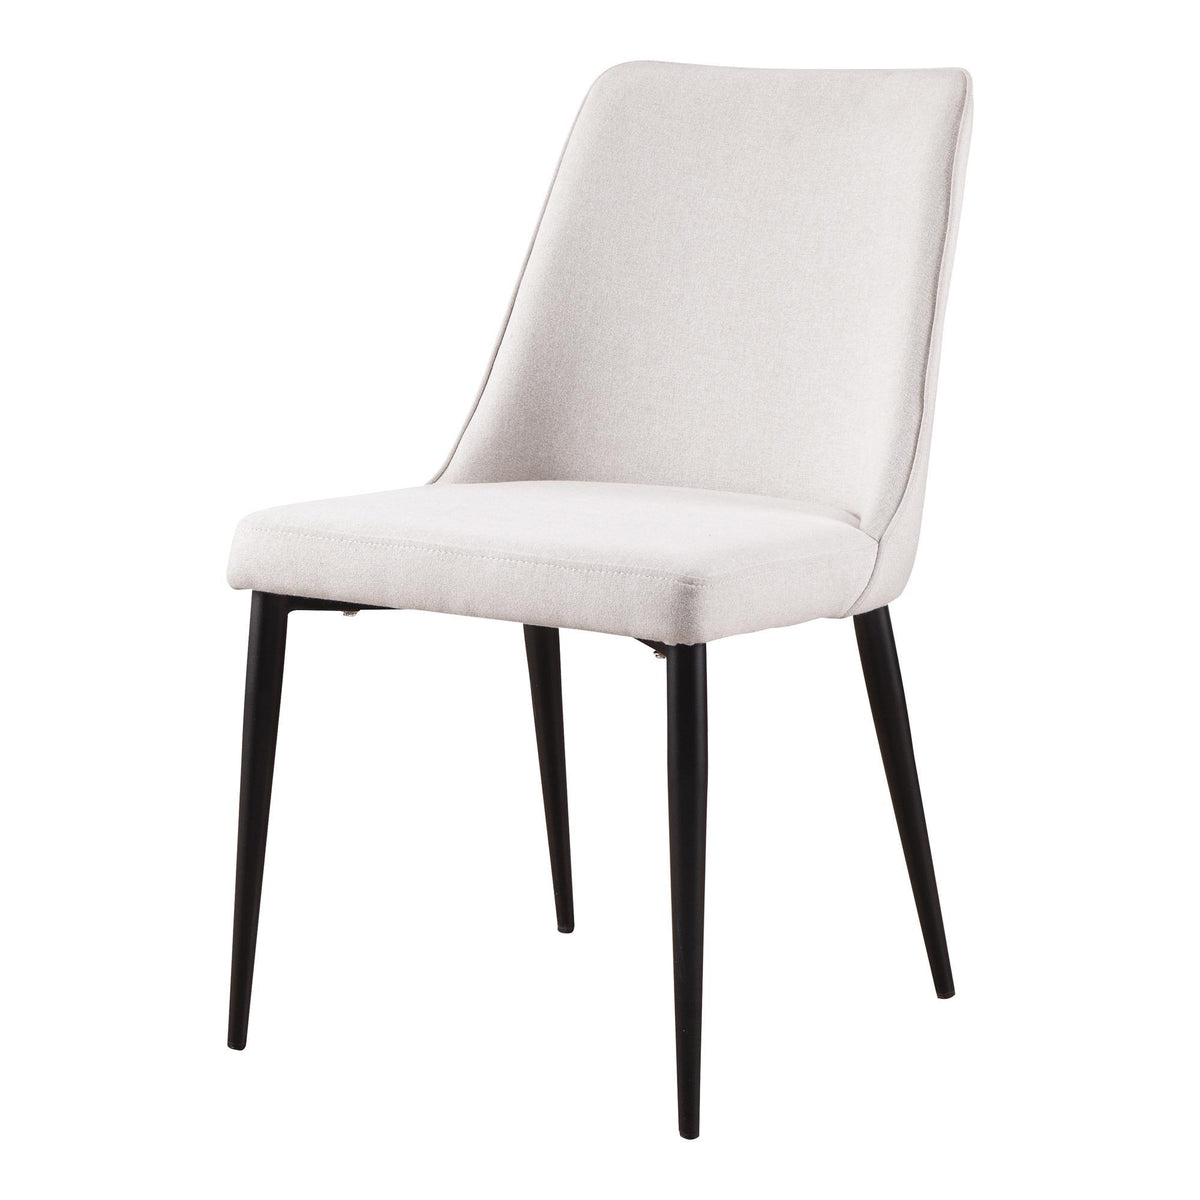 Moe's Home Collection Lula Dining Chair Oatmeal-M2 - YM-1006-05